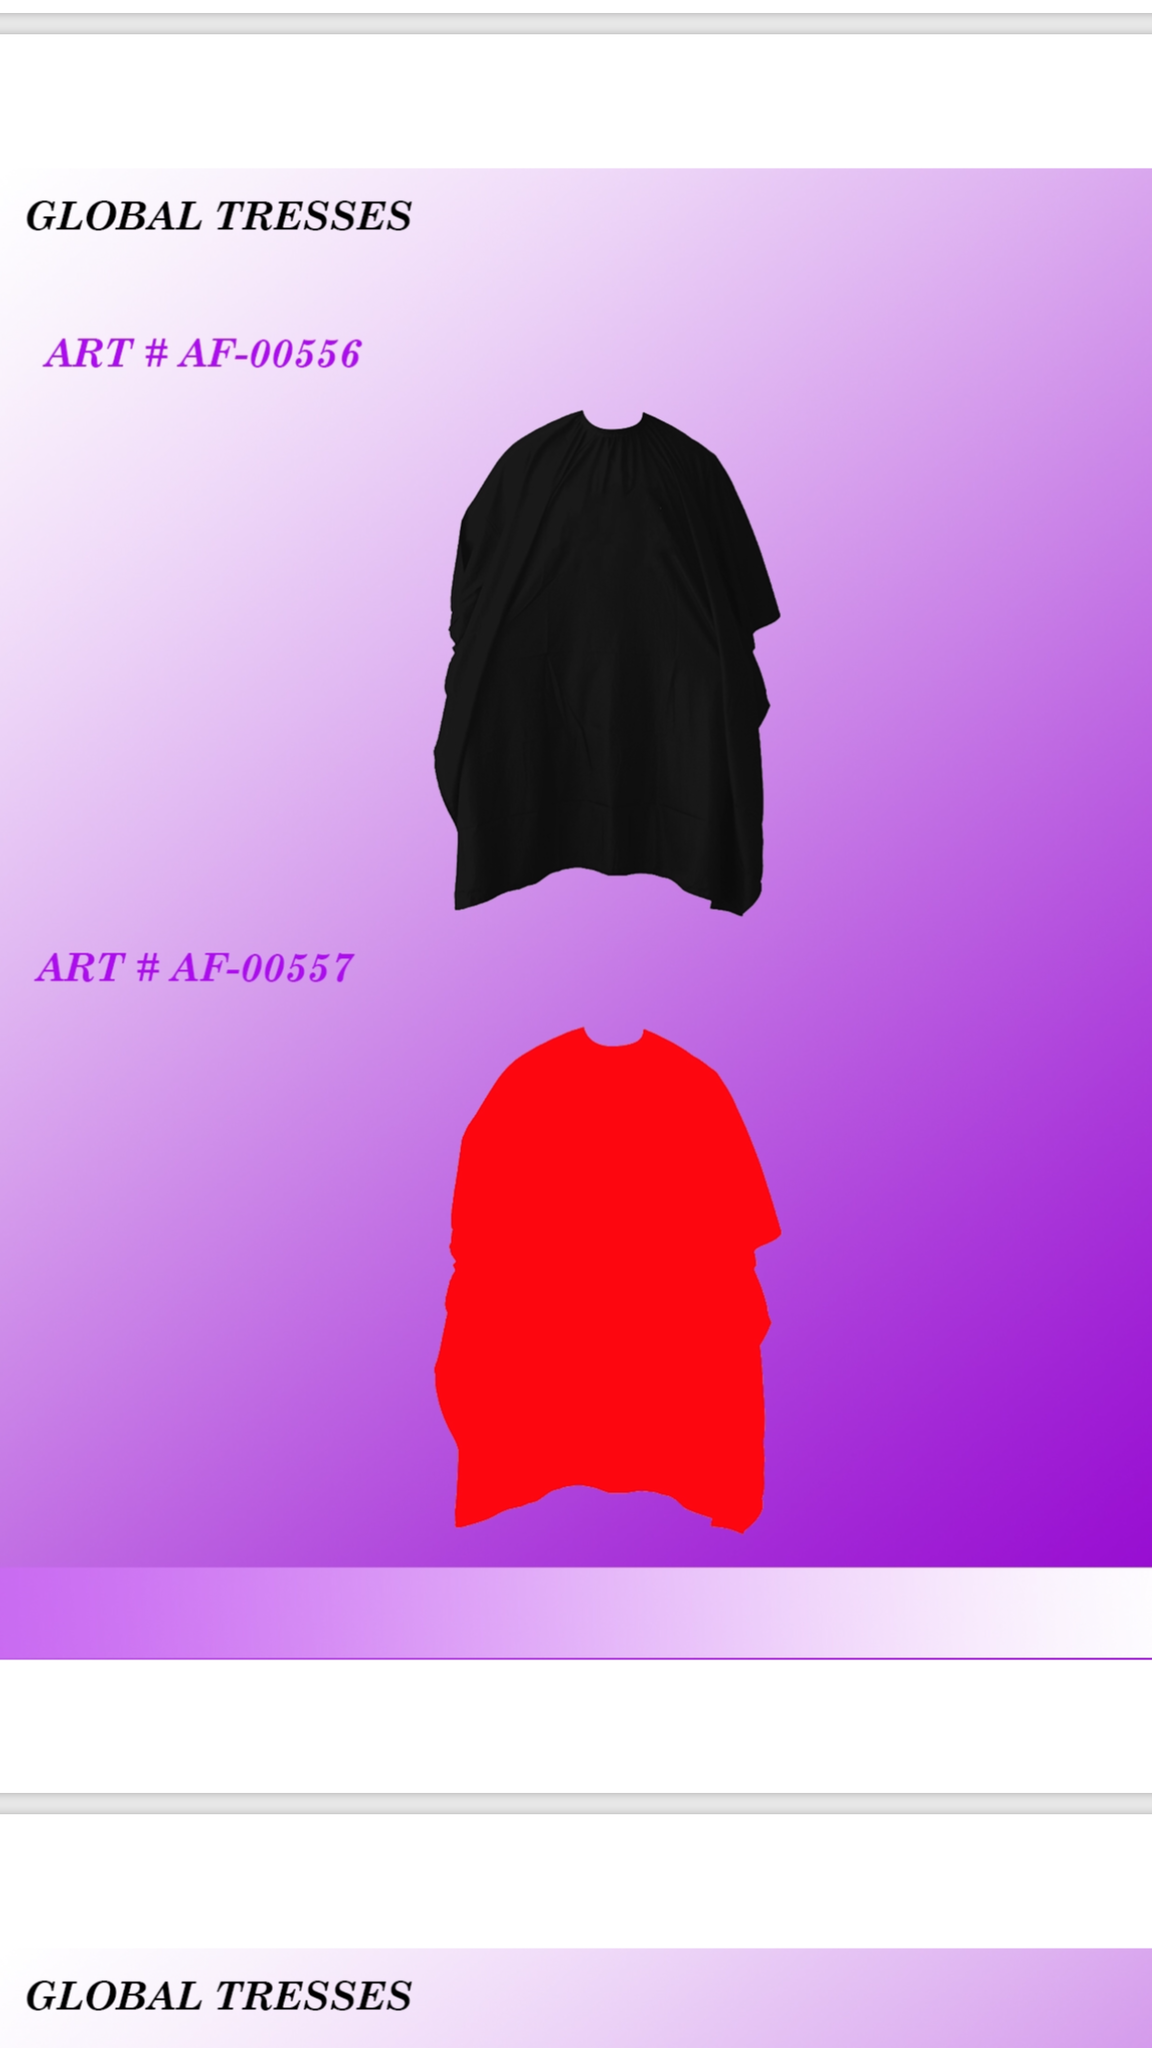 Capes with HUMAN FACE LOGOS